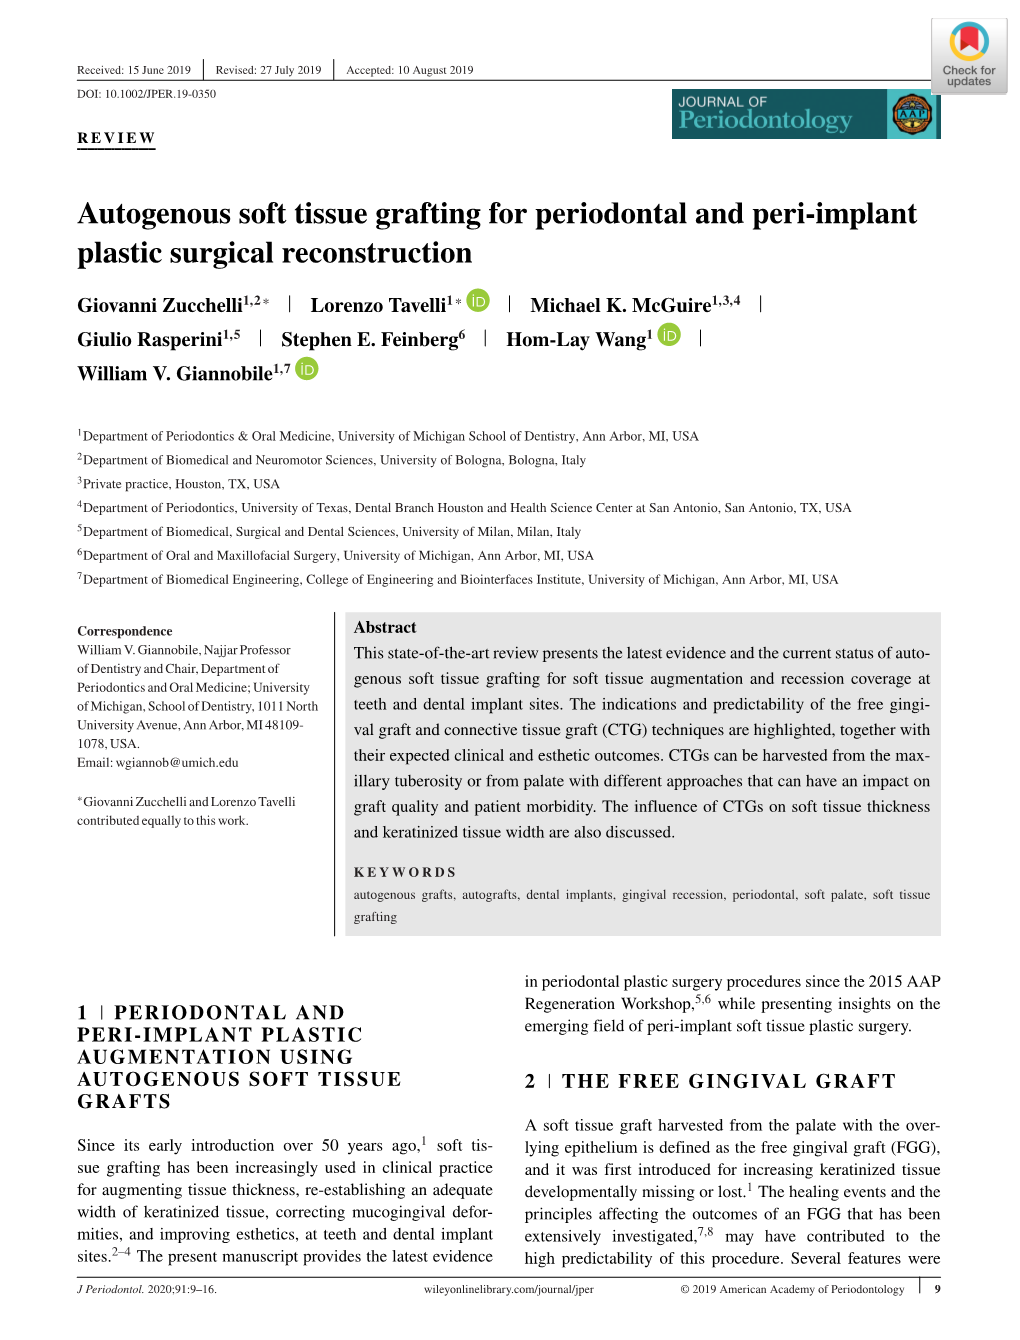 Autogenous Soft Tissue Grafting for Periodontal and Peri‐Implant Plastic